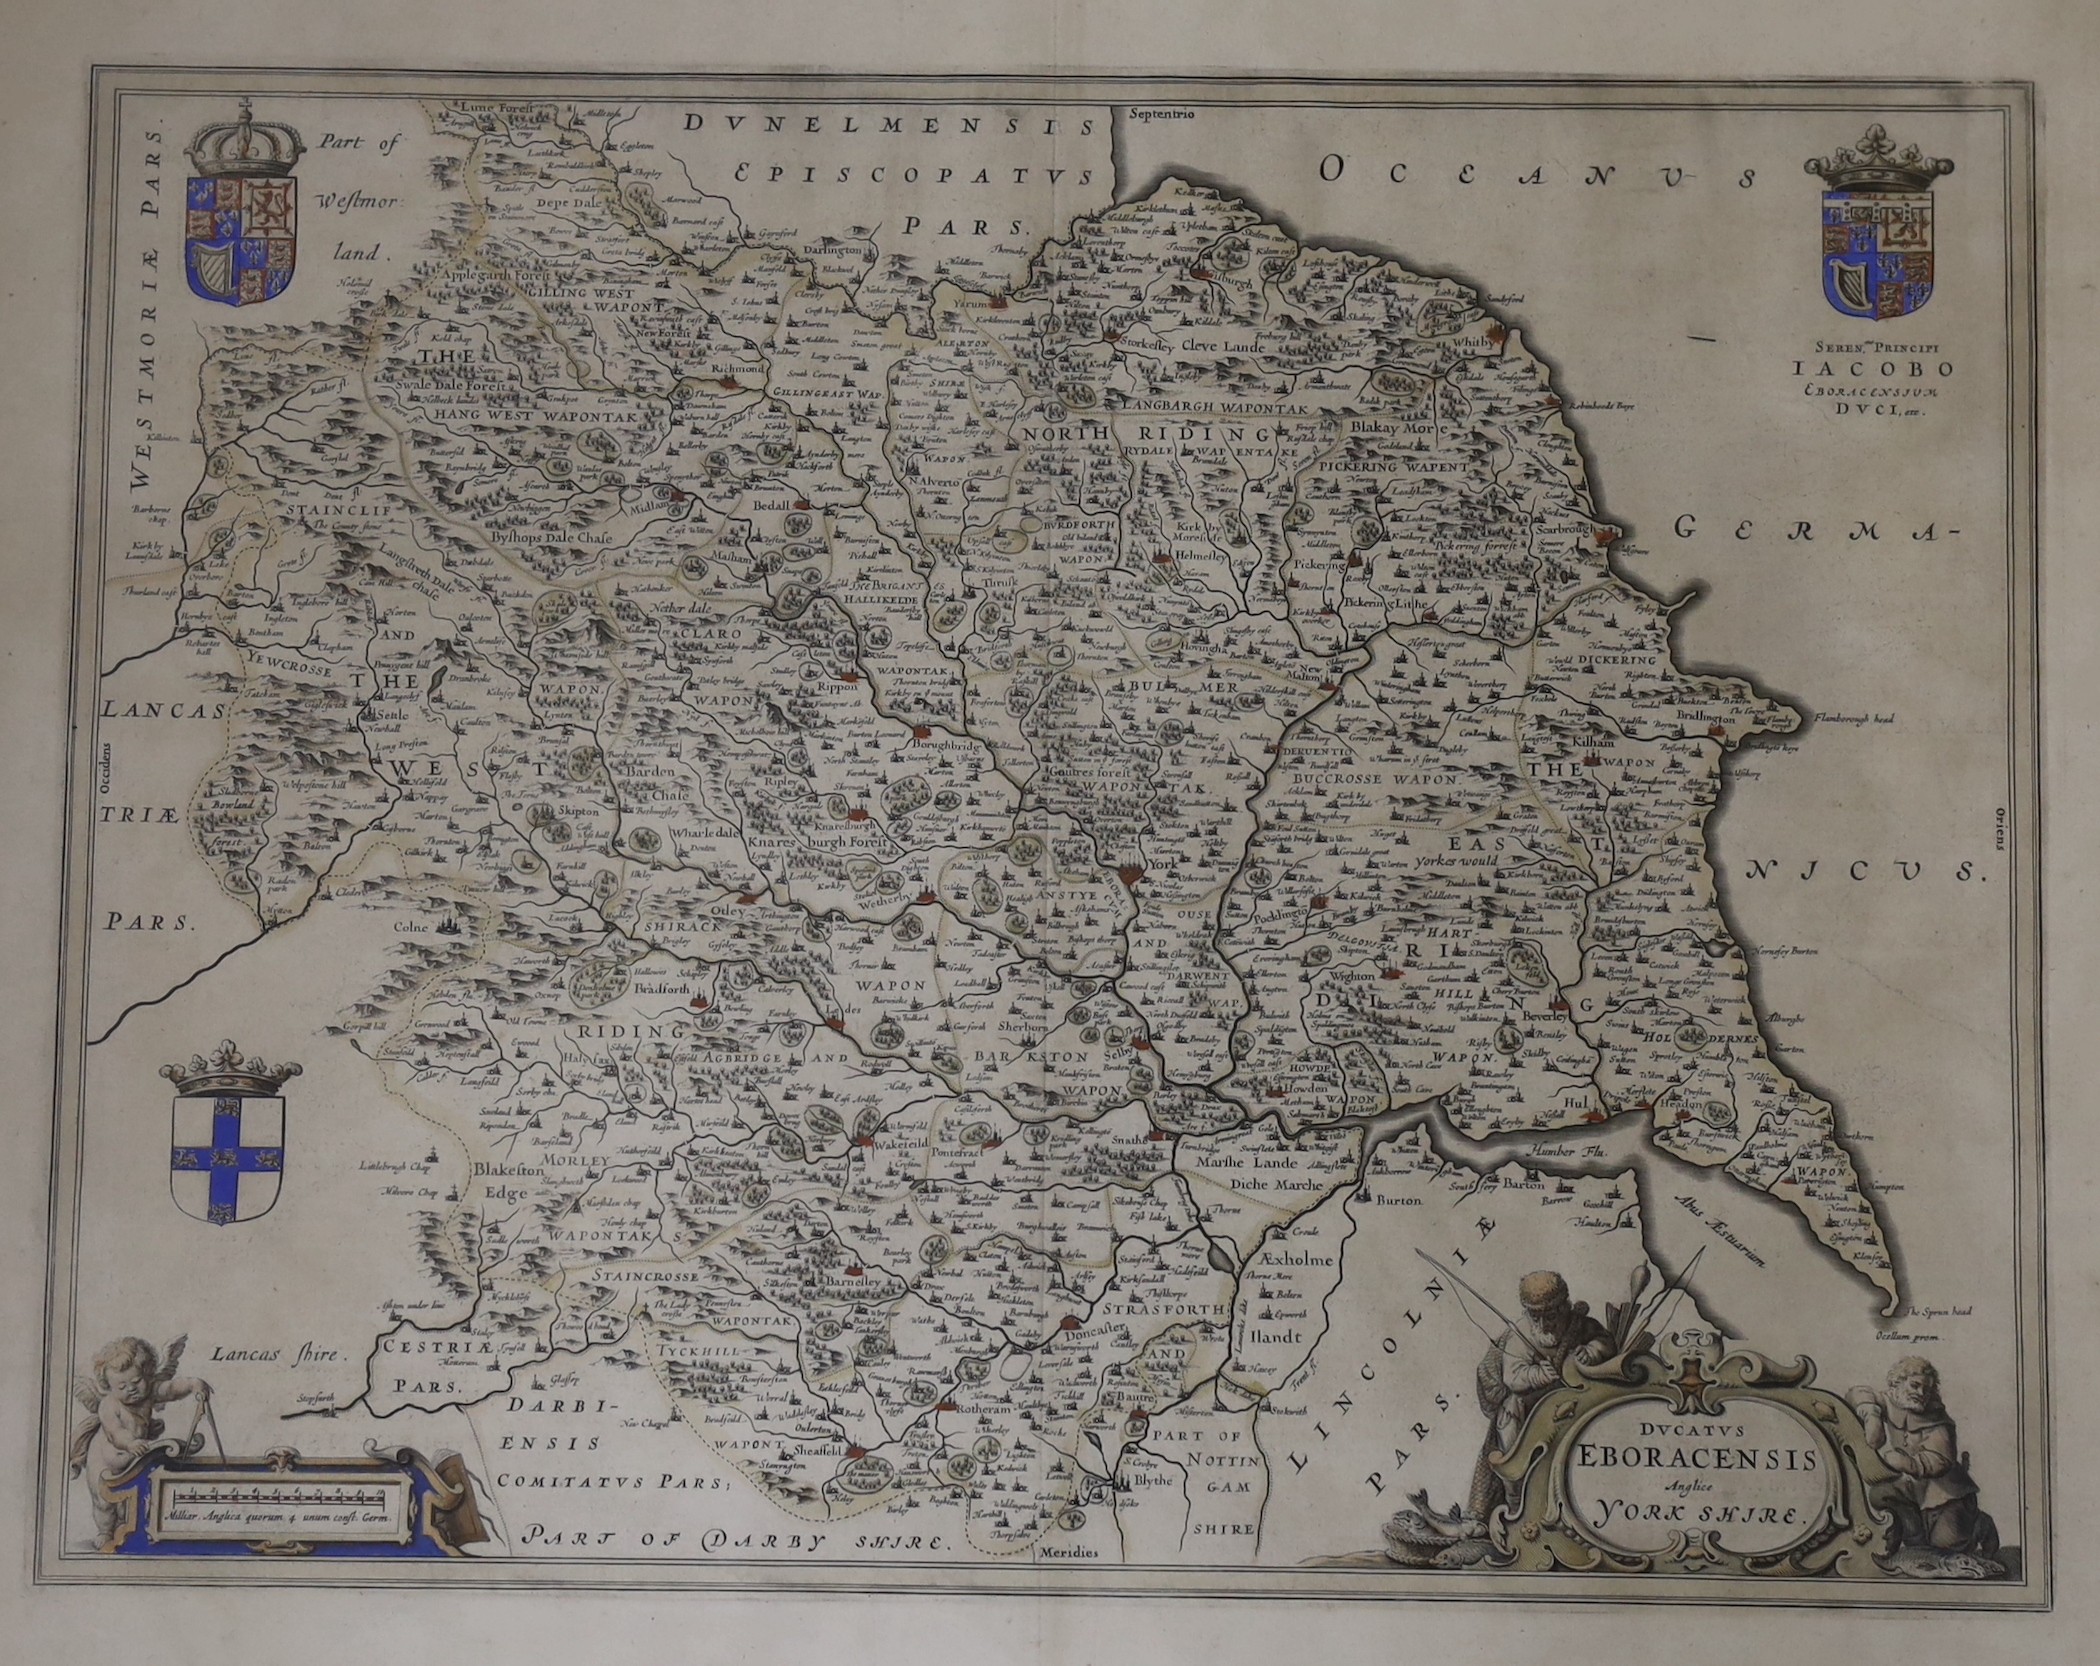 Johannes Blaeu, two coloured engravings, Maps of Devonia and Eboracensis (Yorkshire), overall 50 x 58cm (later impressions)